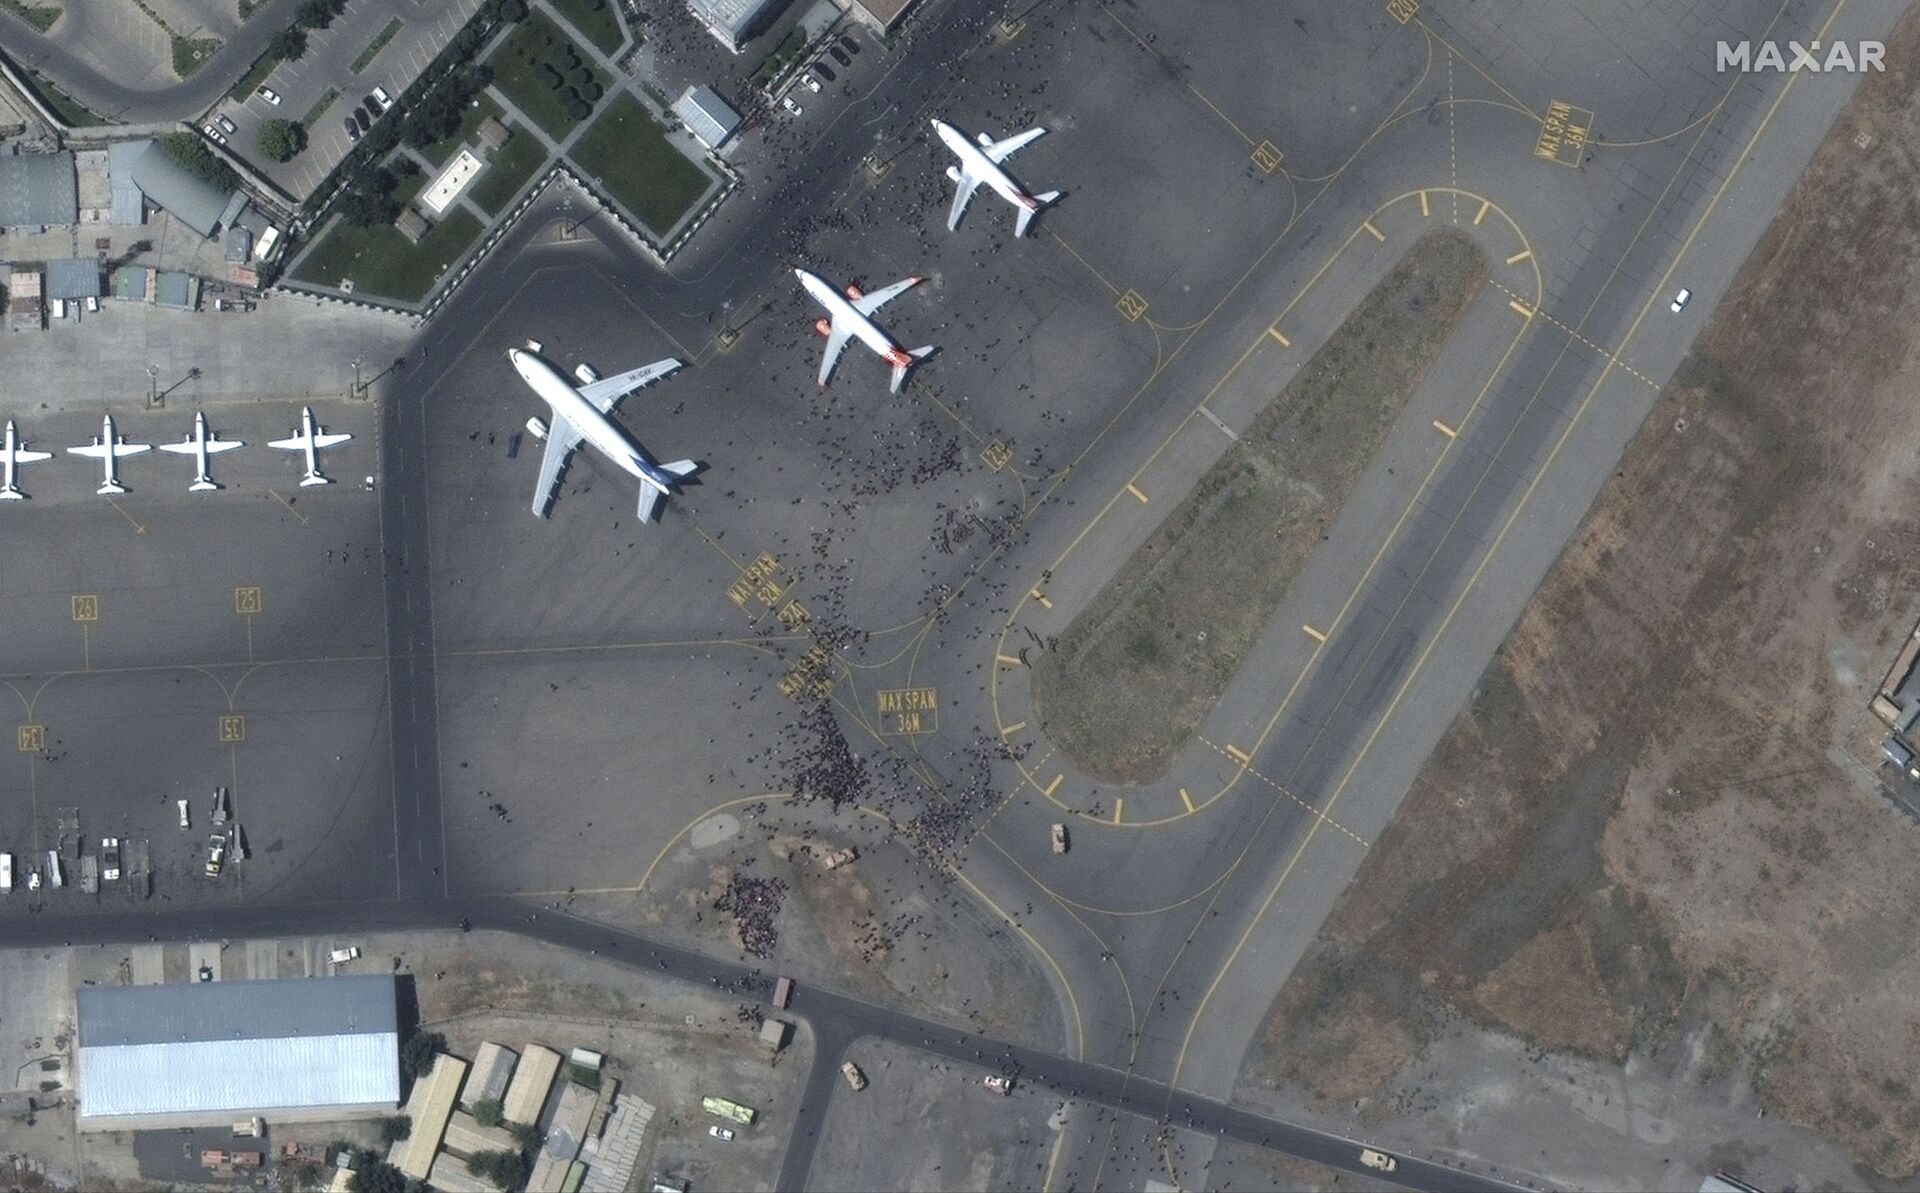 This handout satellite image released by Maxar Technologies shows crowds of people on the tarmac, during the chaotic scene underway at Kabul’s Hamid Karzai International Airport in Afghanistan as thousands of people converged on the tarmac and airport runways as countries attempt to evacuate personnel from the city on August 16, 2021. - Sputnik International, 1920, 07.09.2021